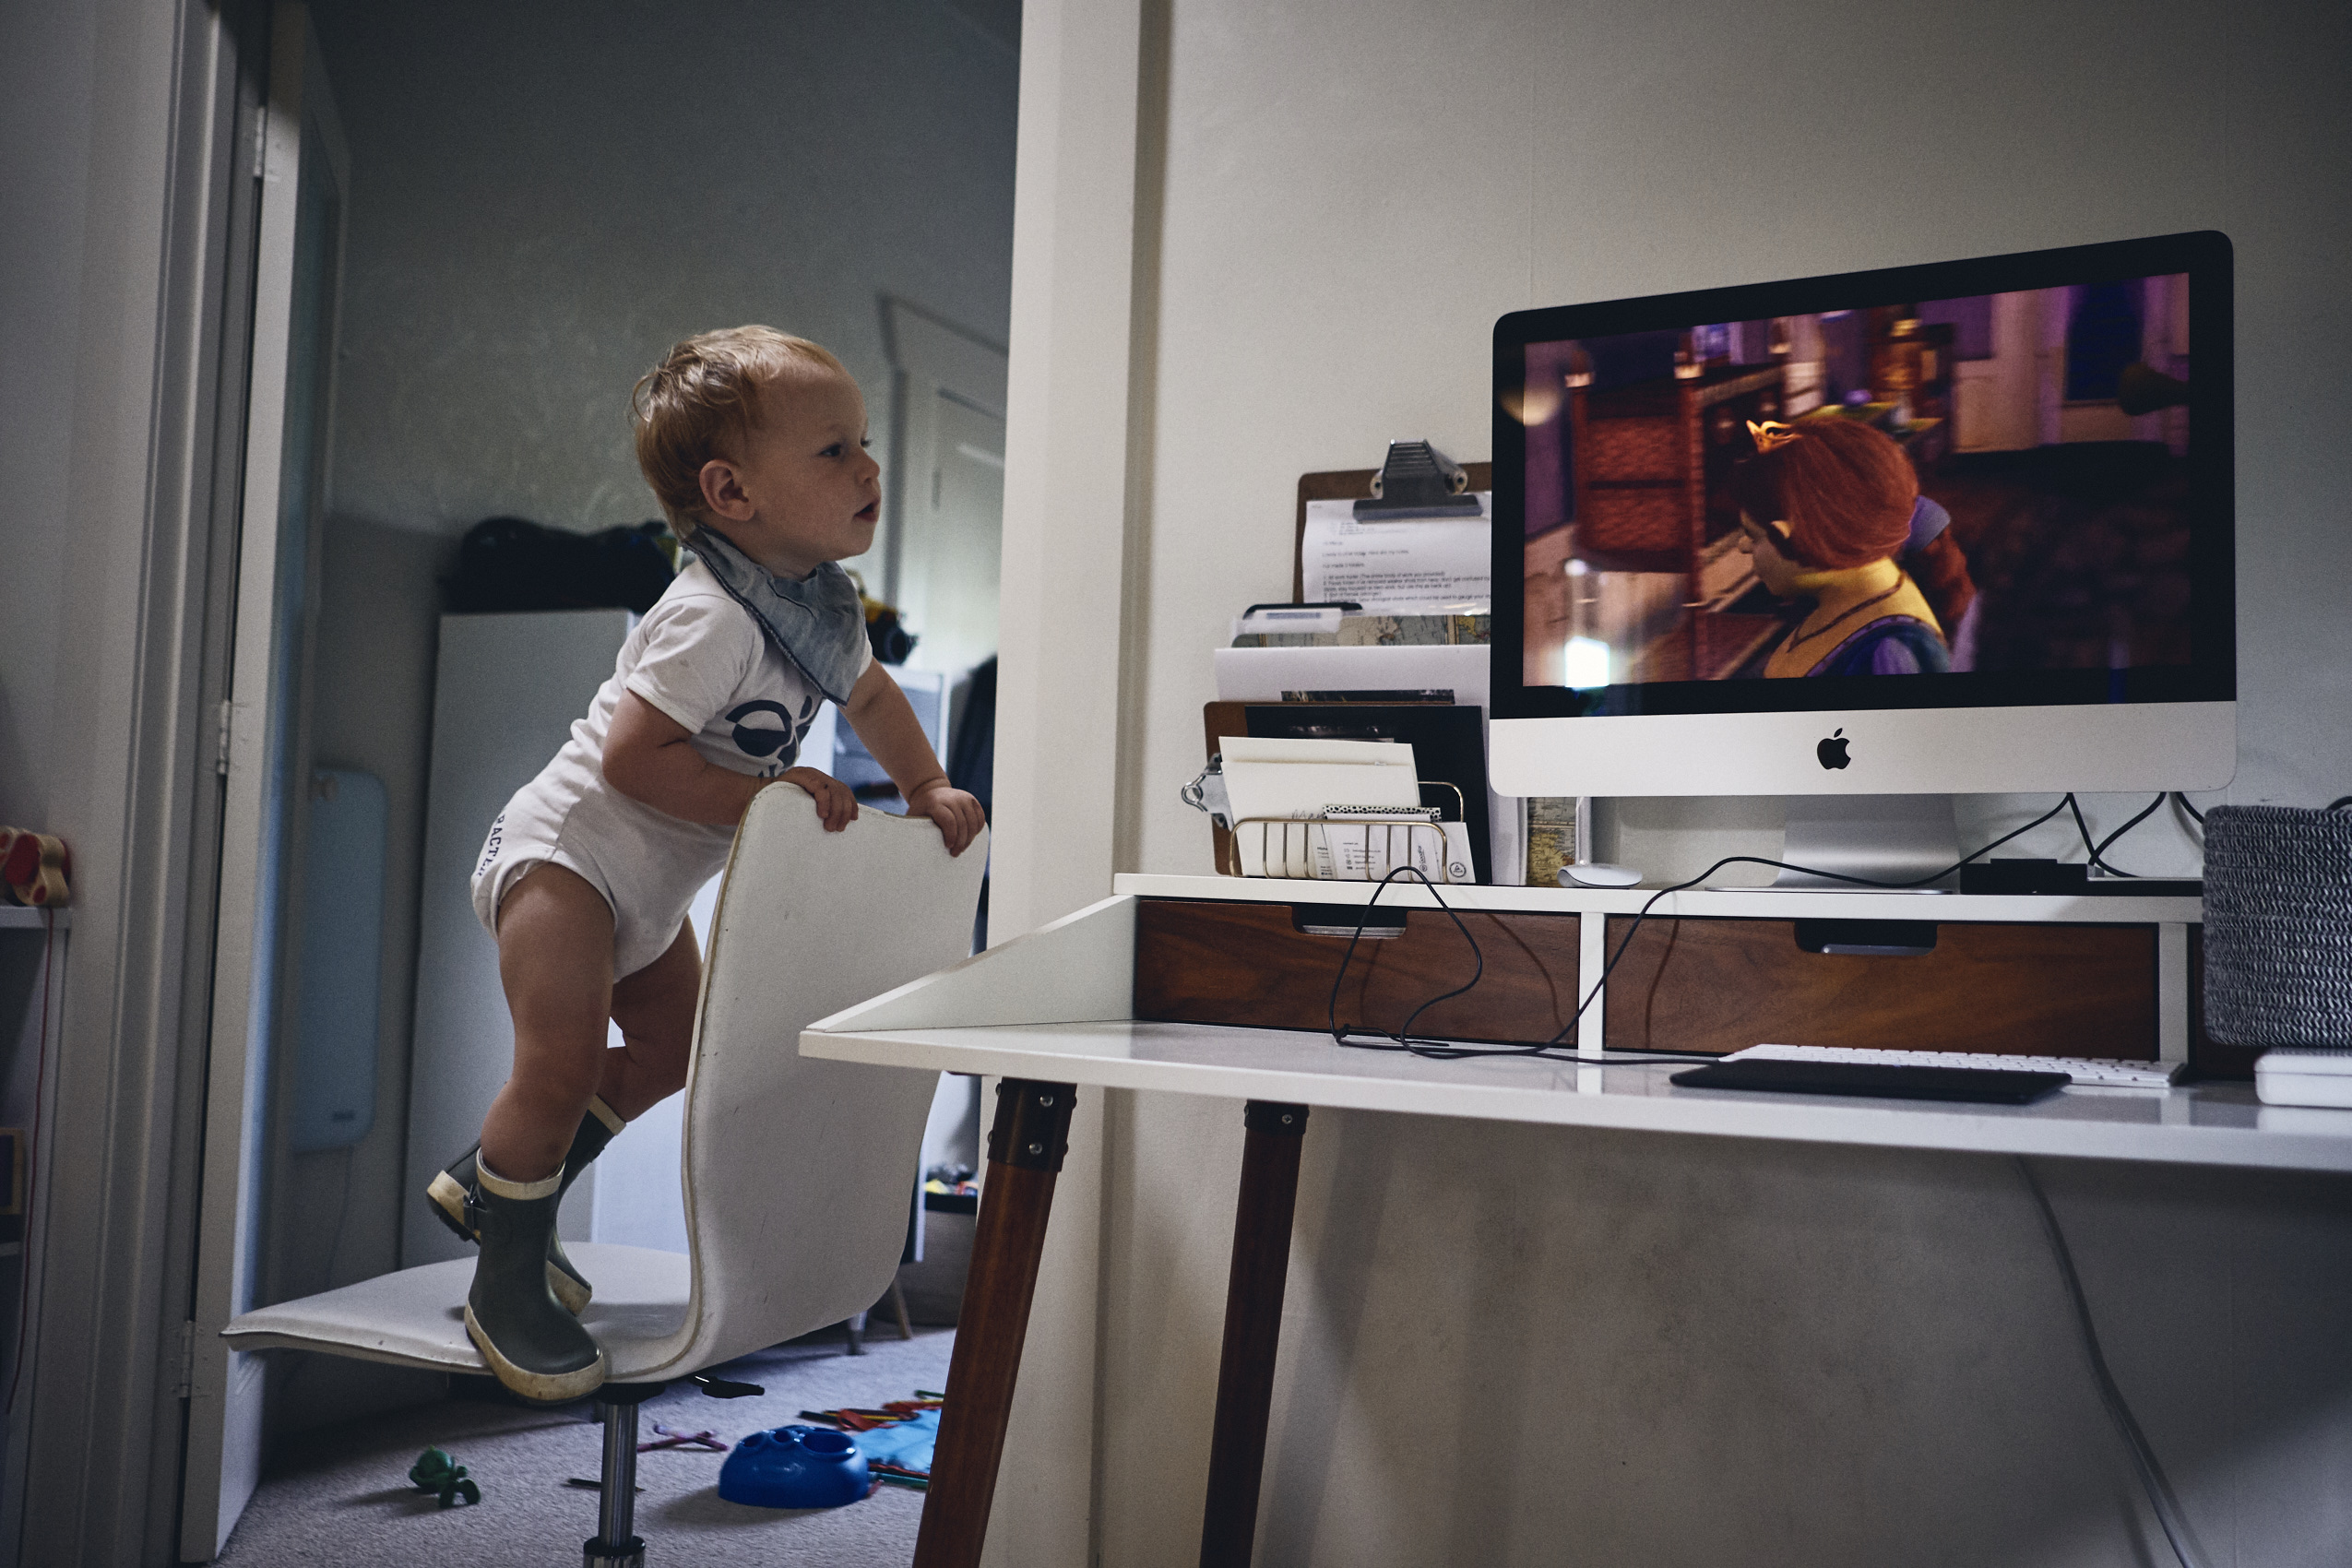 Lockdown • Young Boy Watching Movies on iMac at Home  • Lifestyle & Portrait Photography